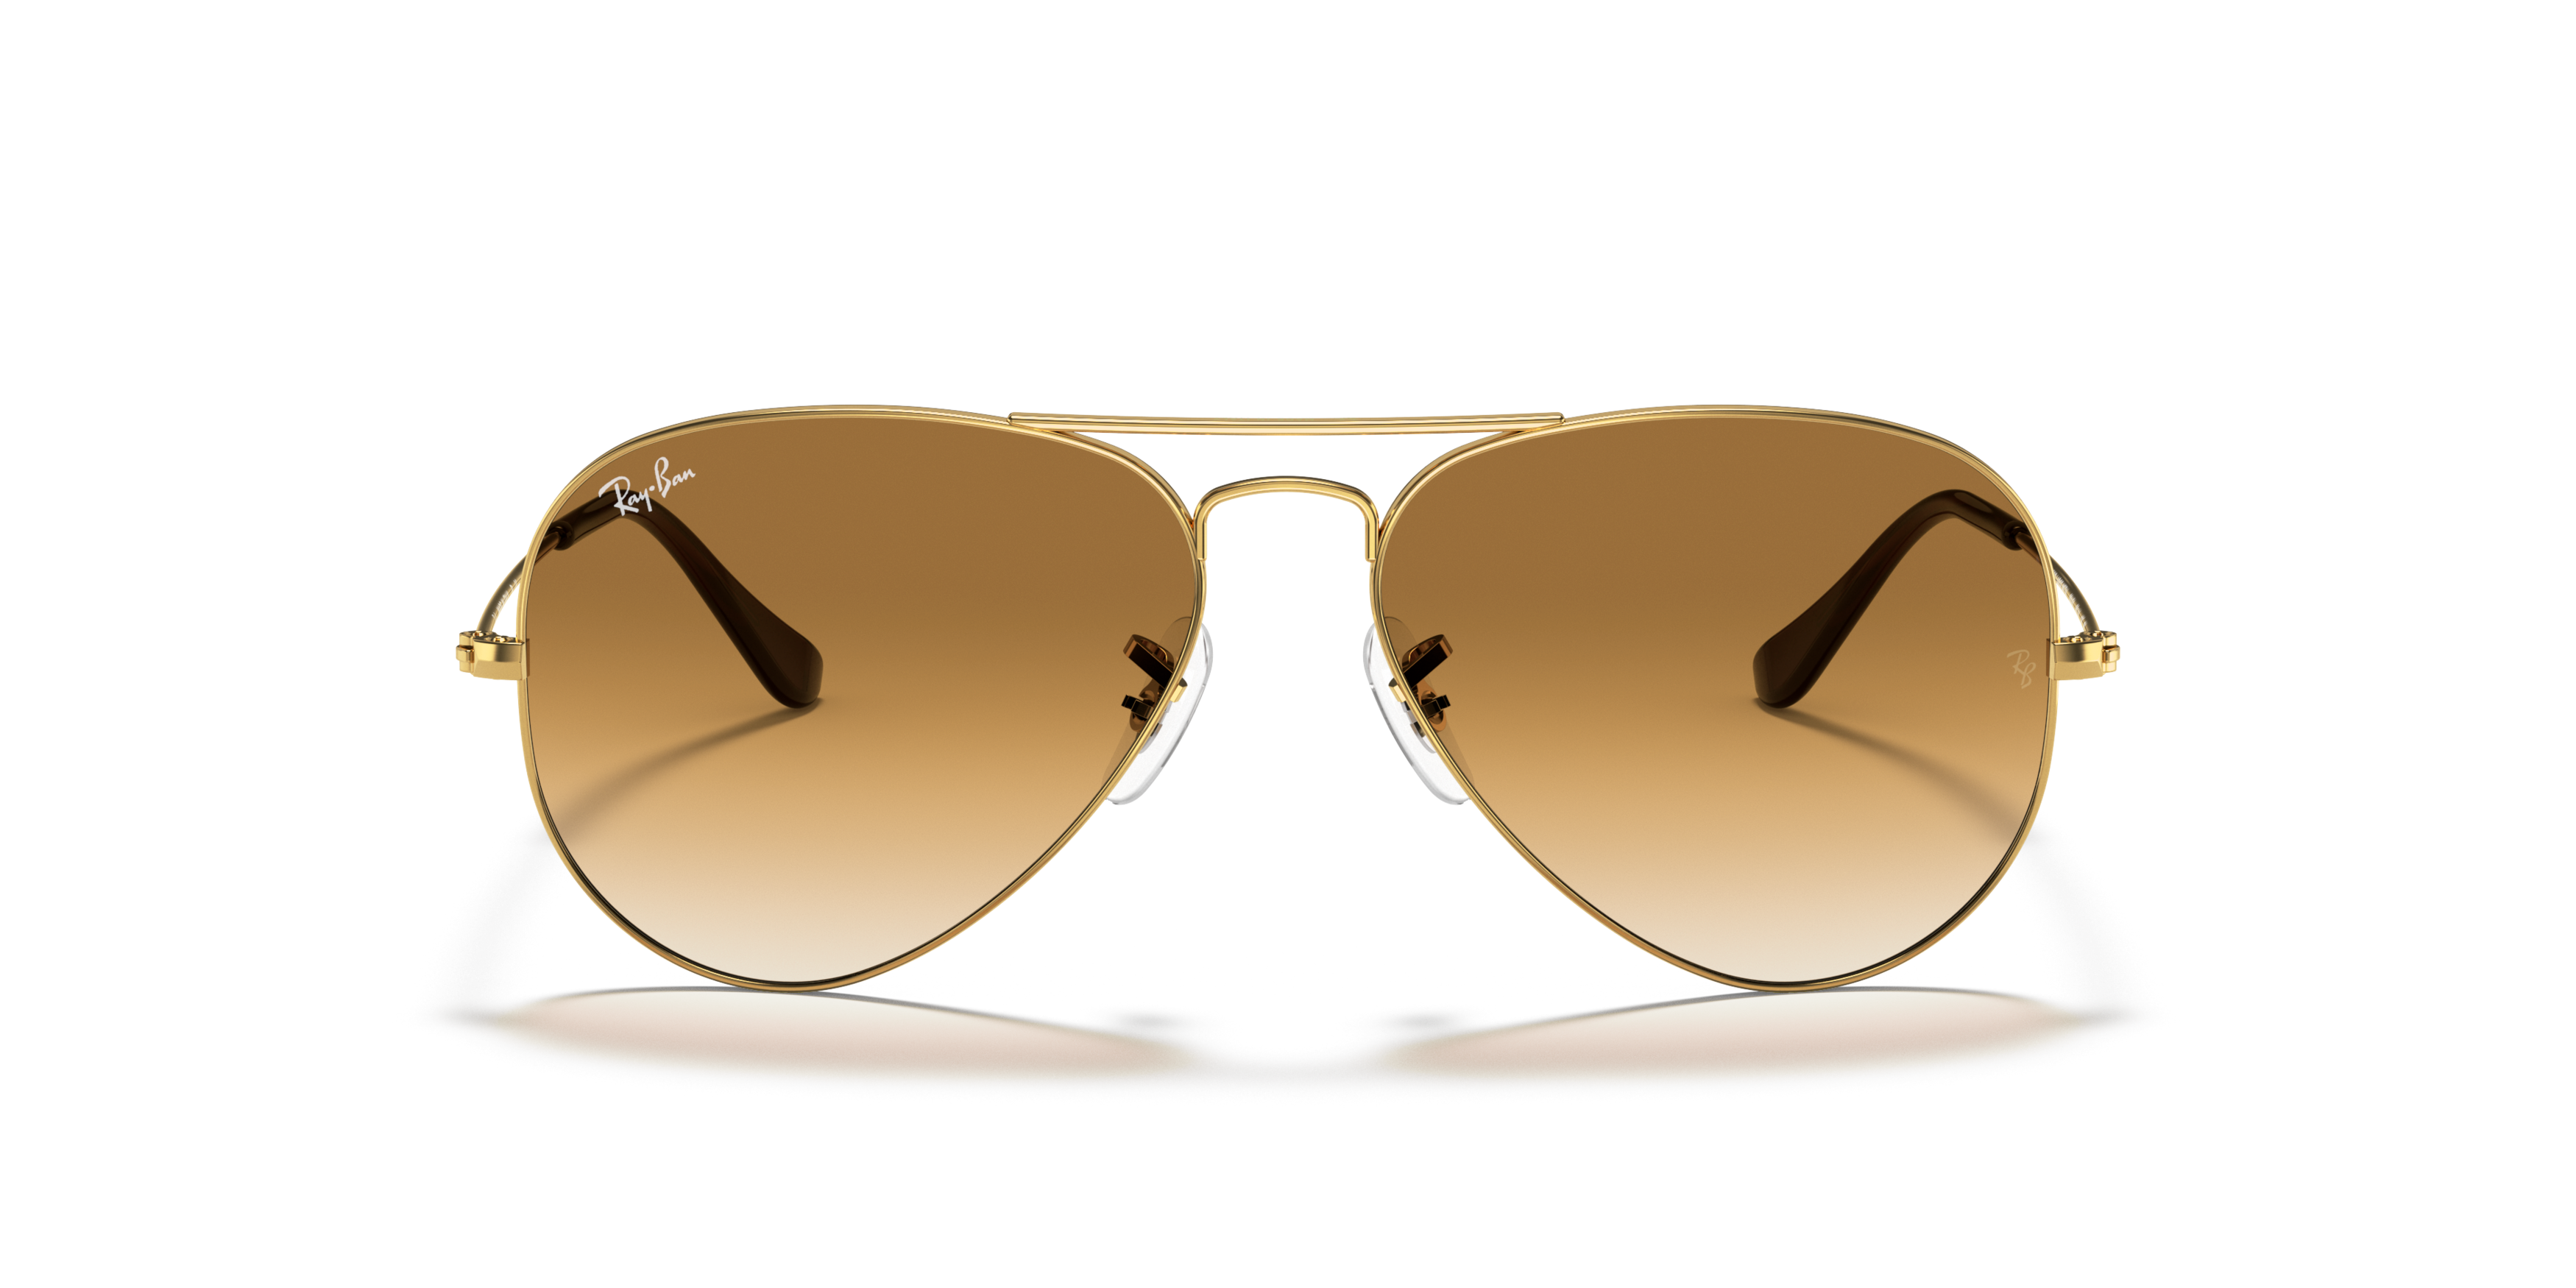 [products.image.front] Ray-Ban Aviator RB3025 001/51